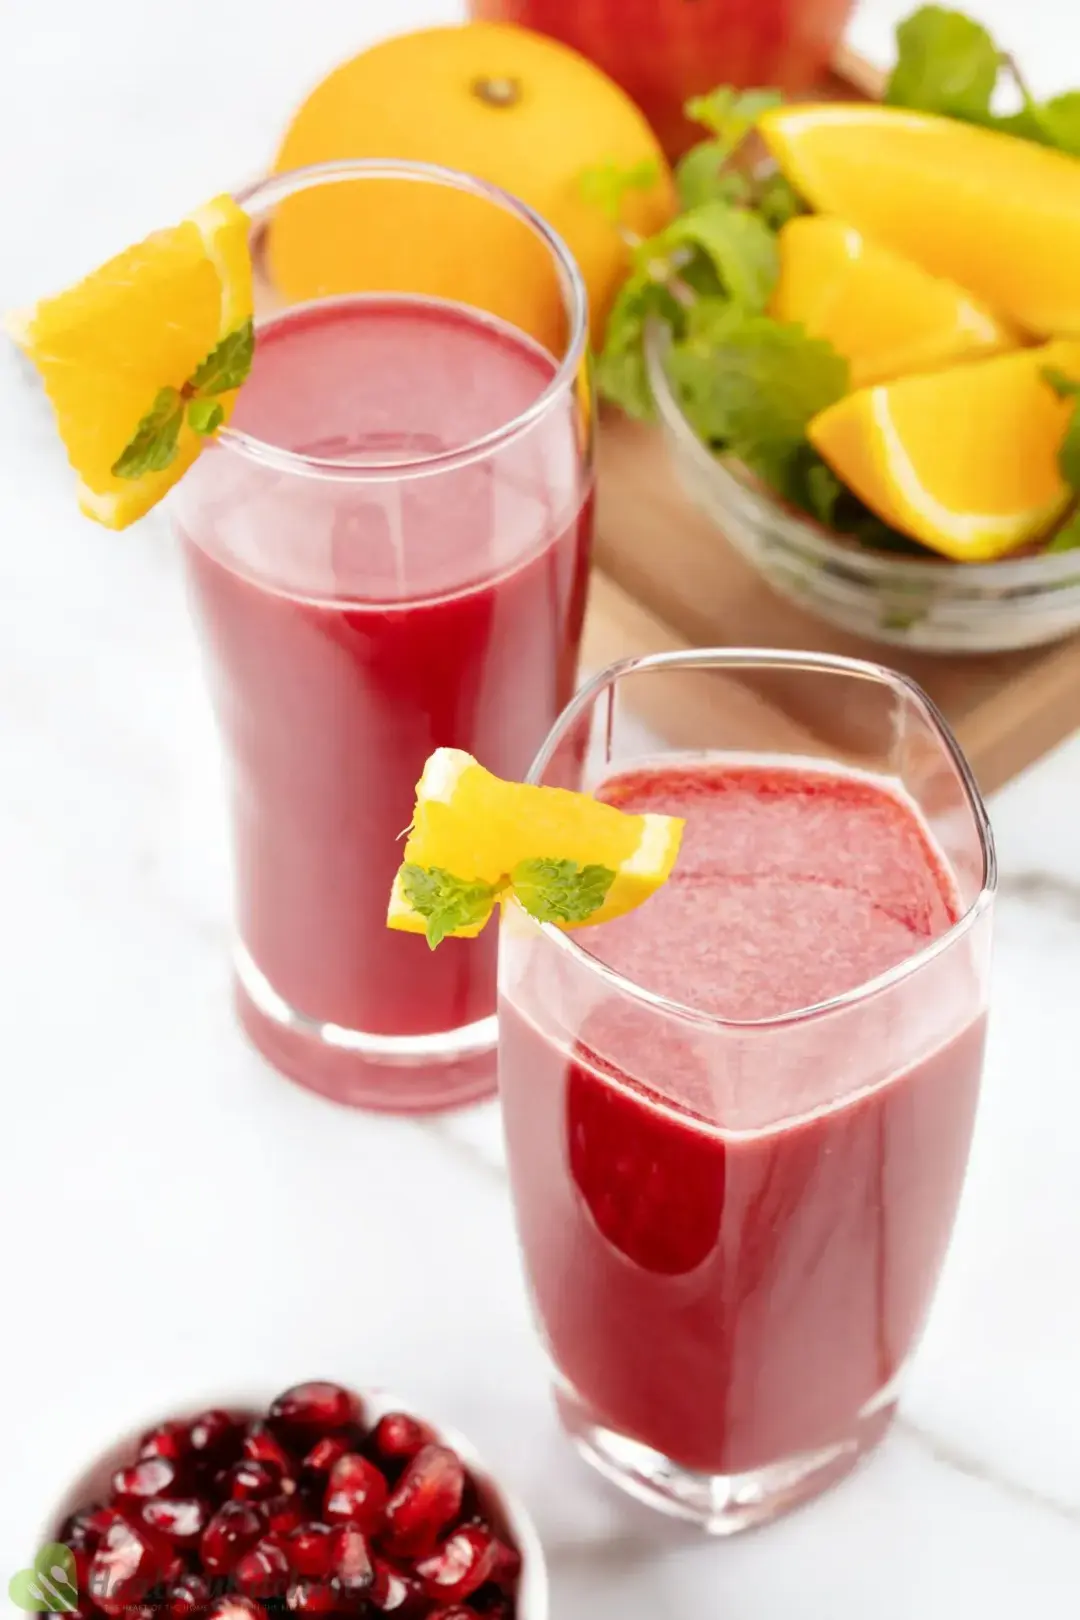 Two glasses of pomegranate orange juice put next to each other and a small bowl of pomegranate seeds